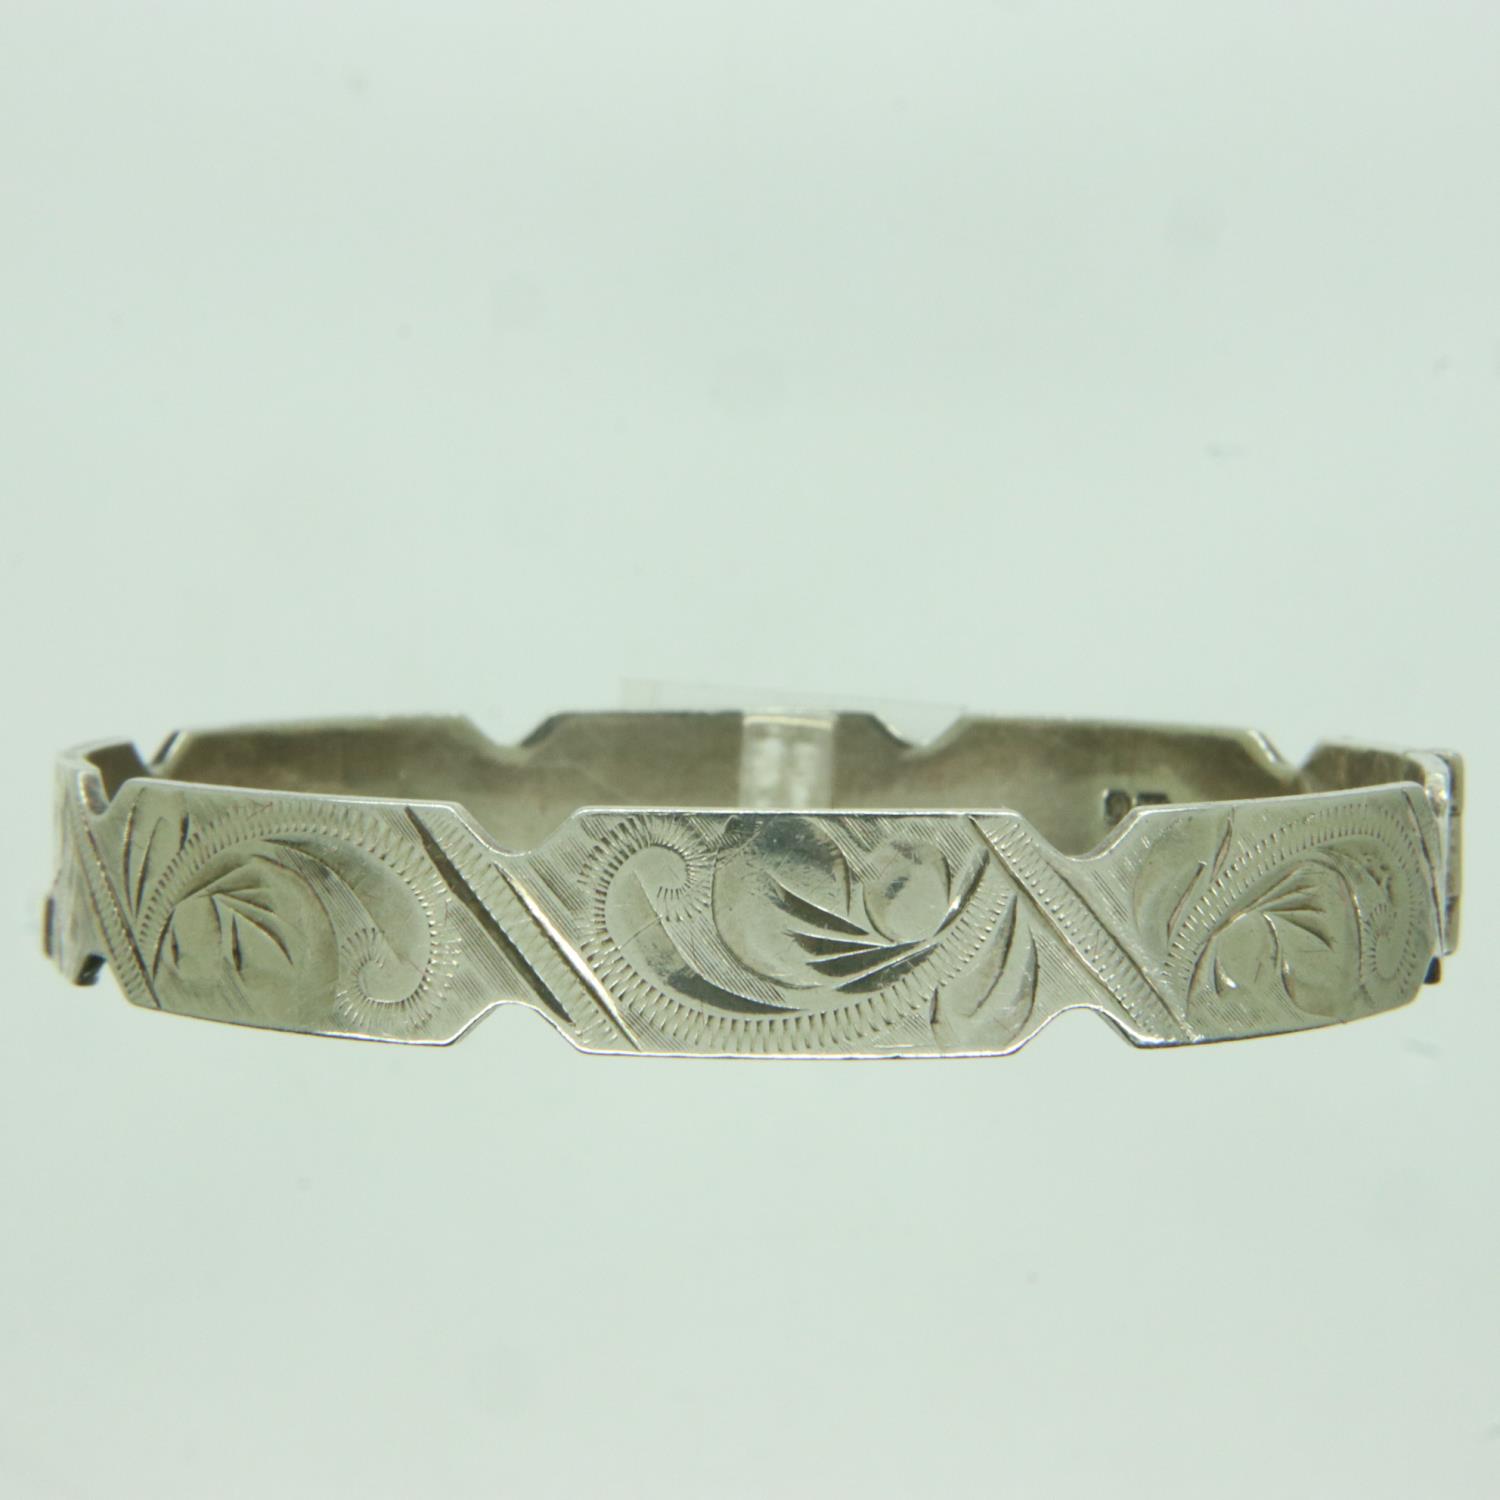 Hallmarked silver bangle, 21g. UK P&P Group 1 (£16+VAT for the first lot and £2+VAT for subsequent